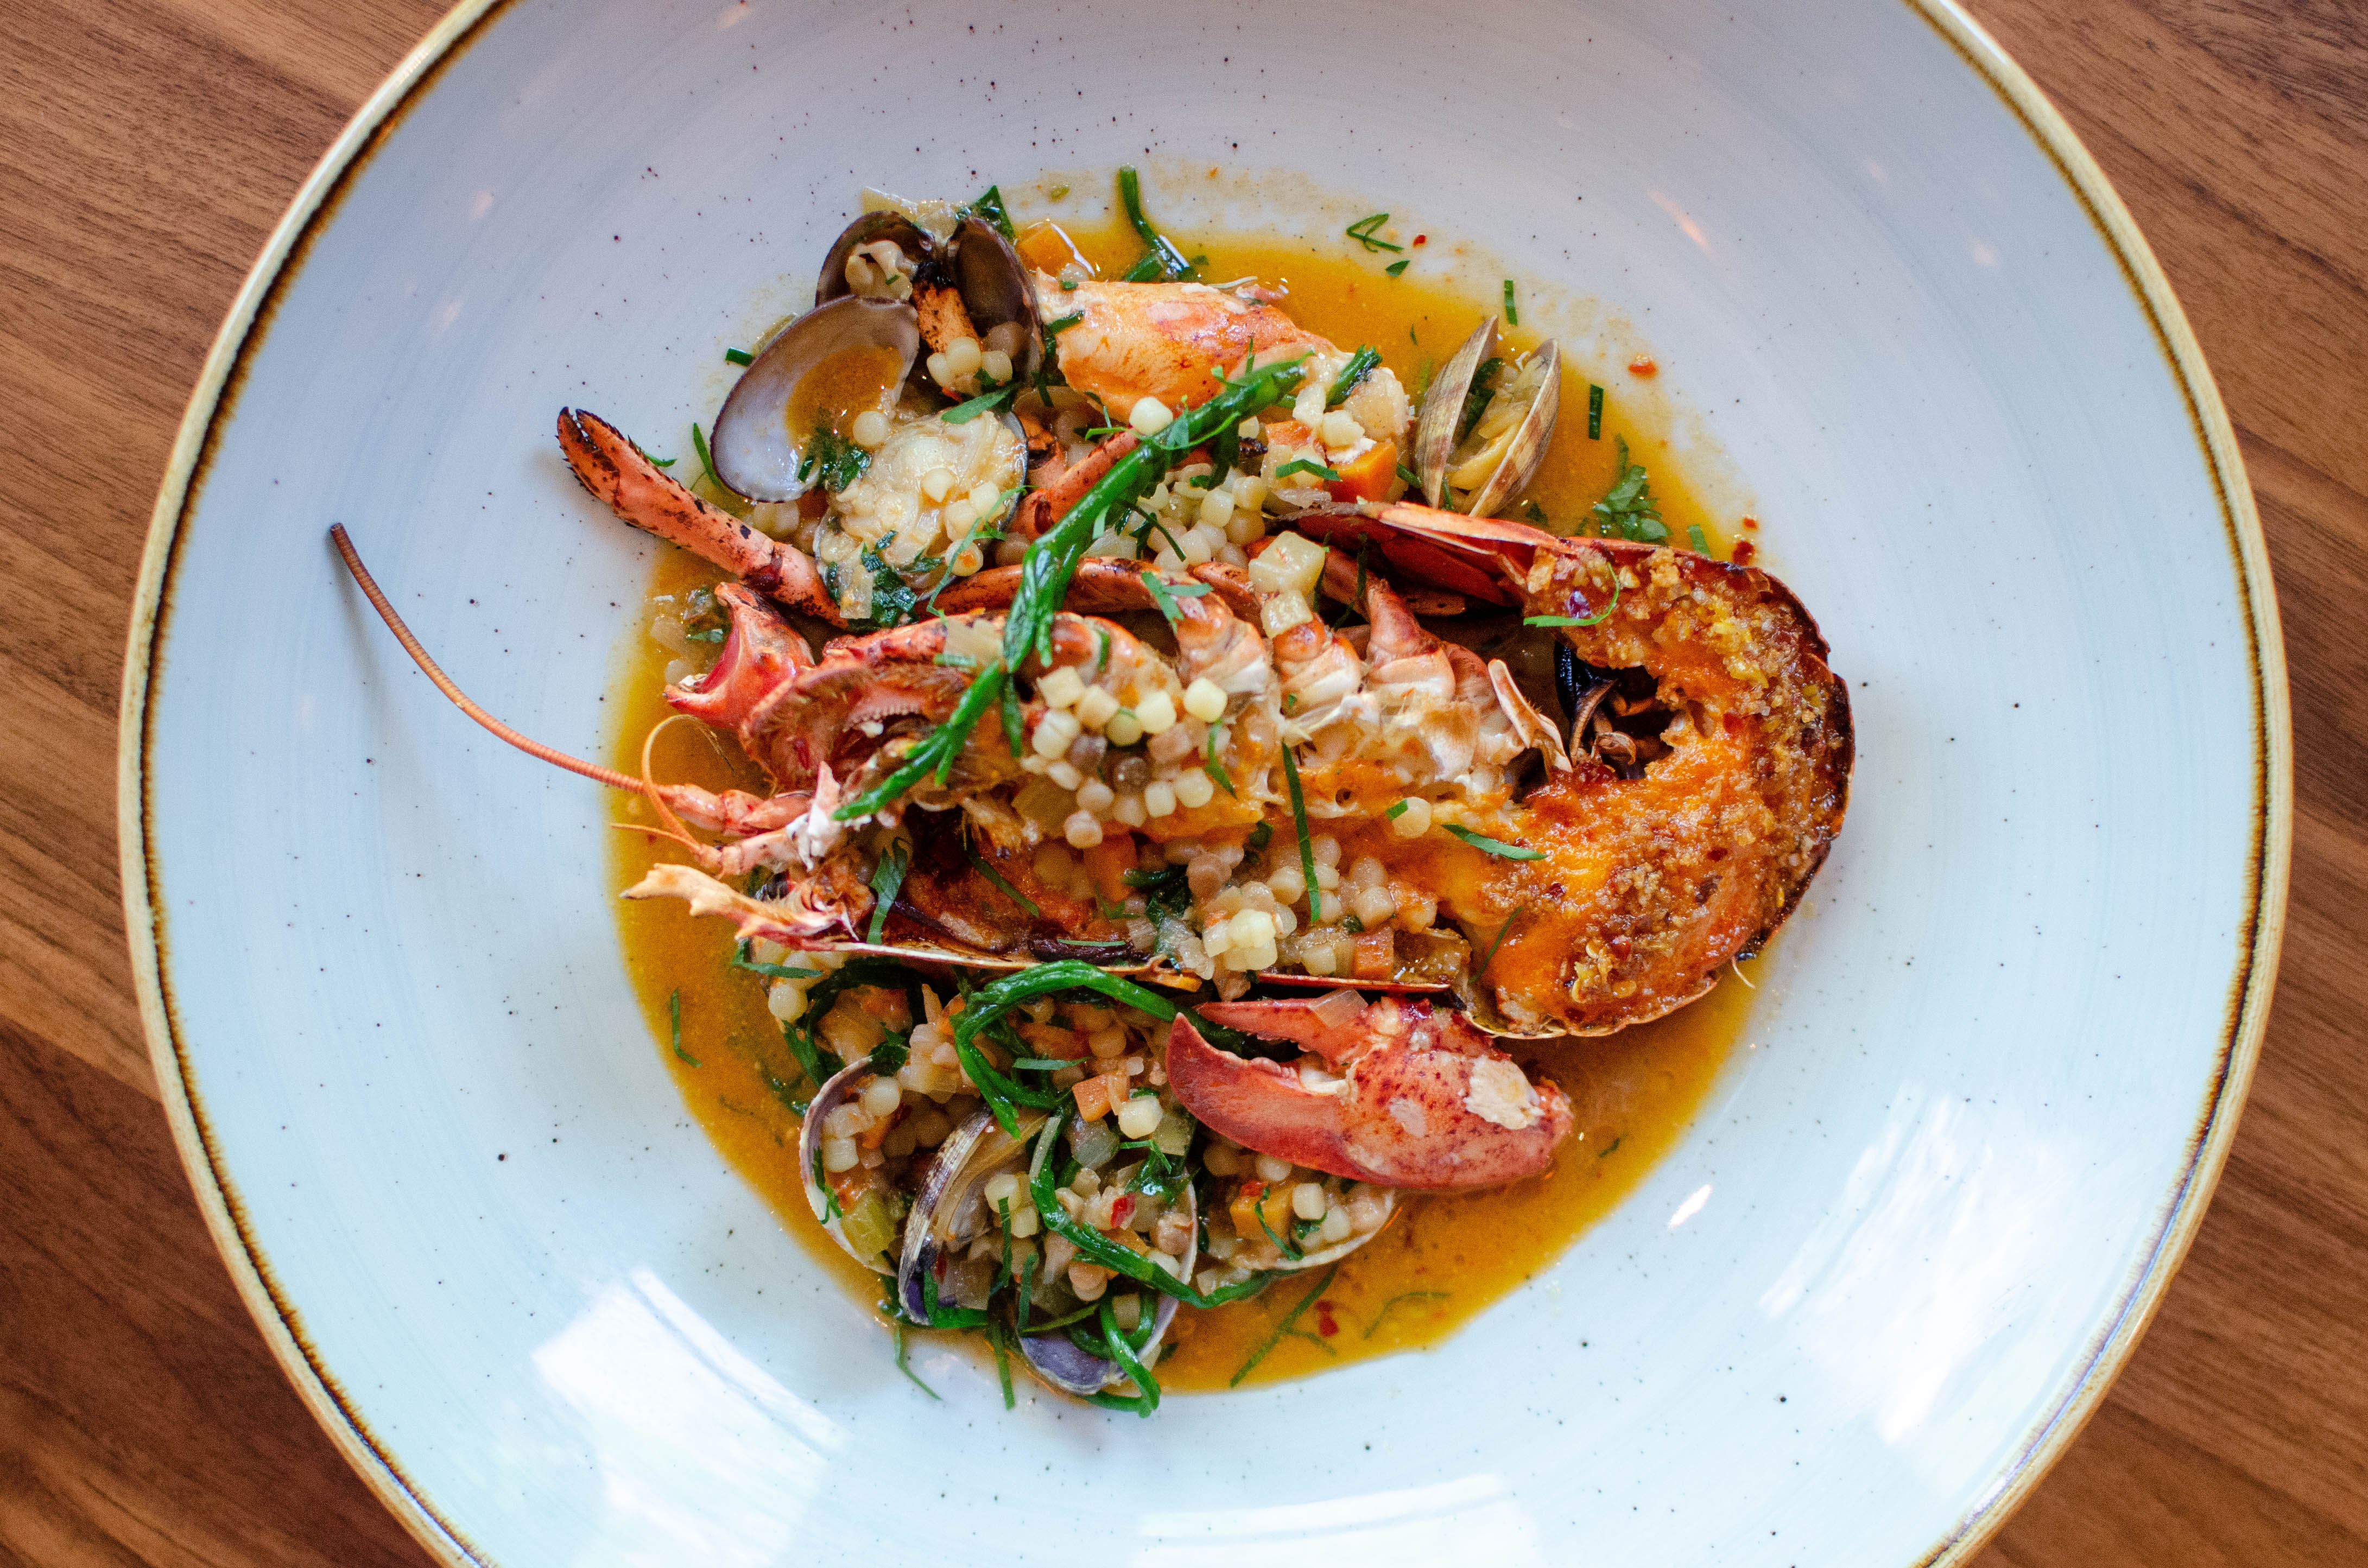 Overhead view of a half lobster sitting in a small pool of reddish broth and topped with small, round dots of pasta, herbs, and small clams.